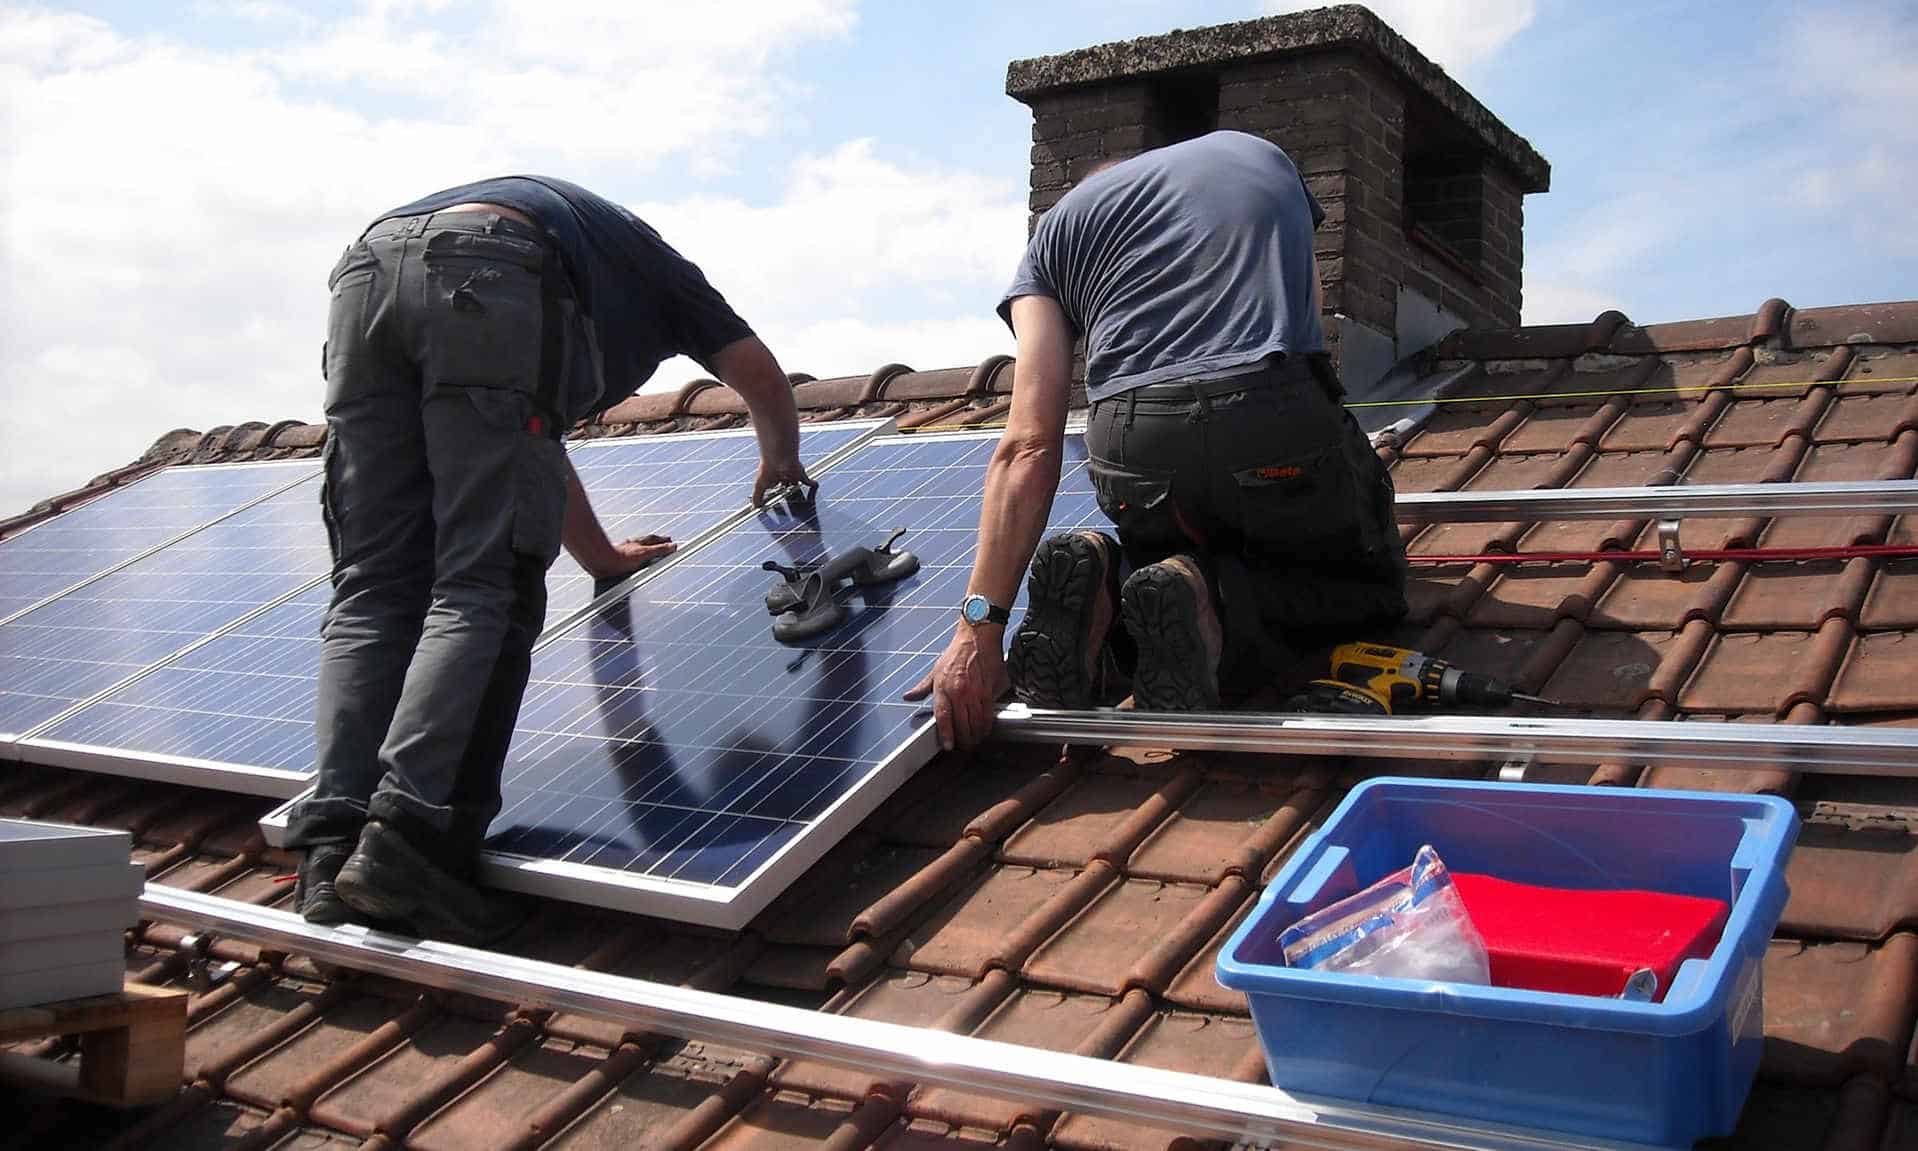 How To Determine If Your Roof Supports the Solar Panel